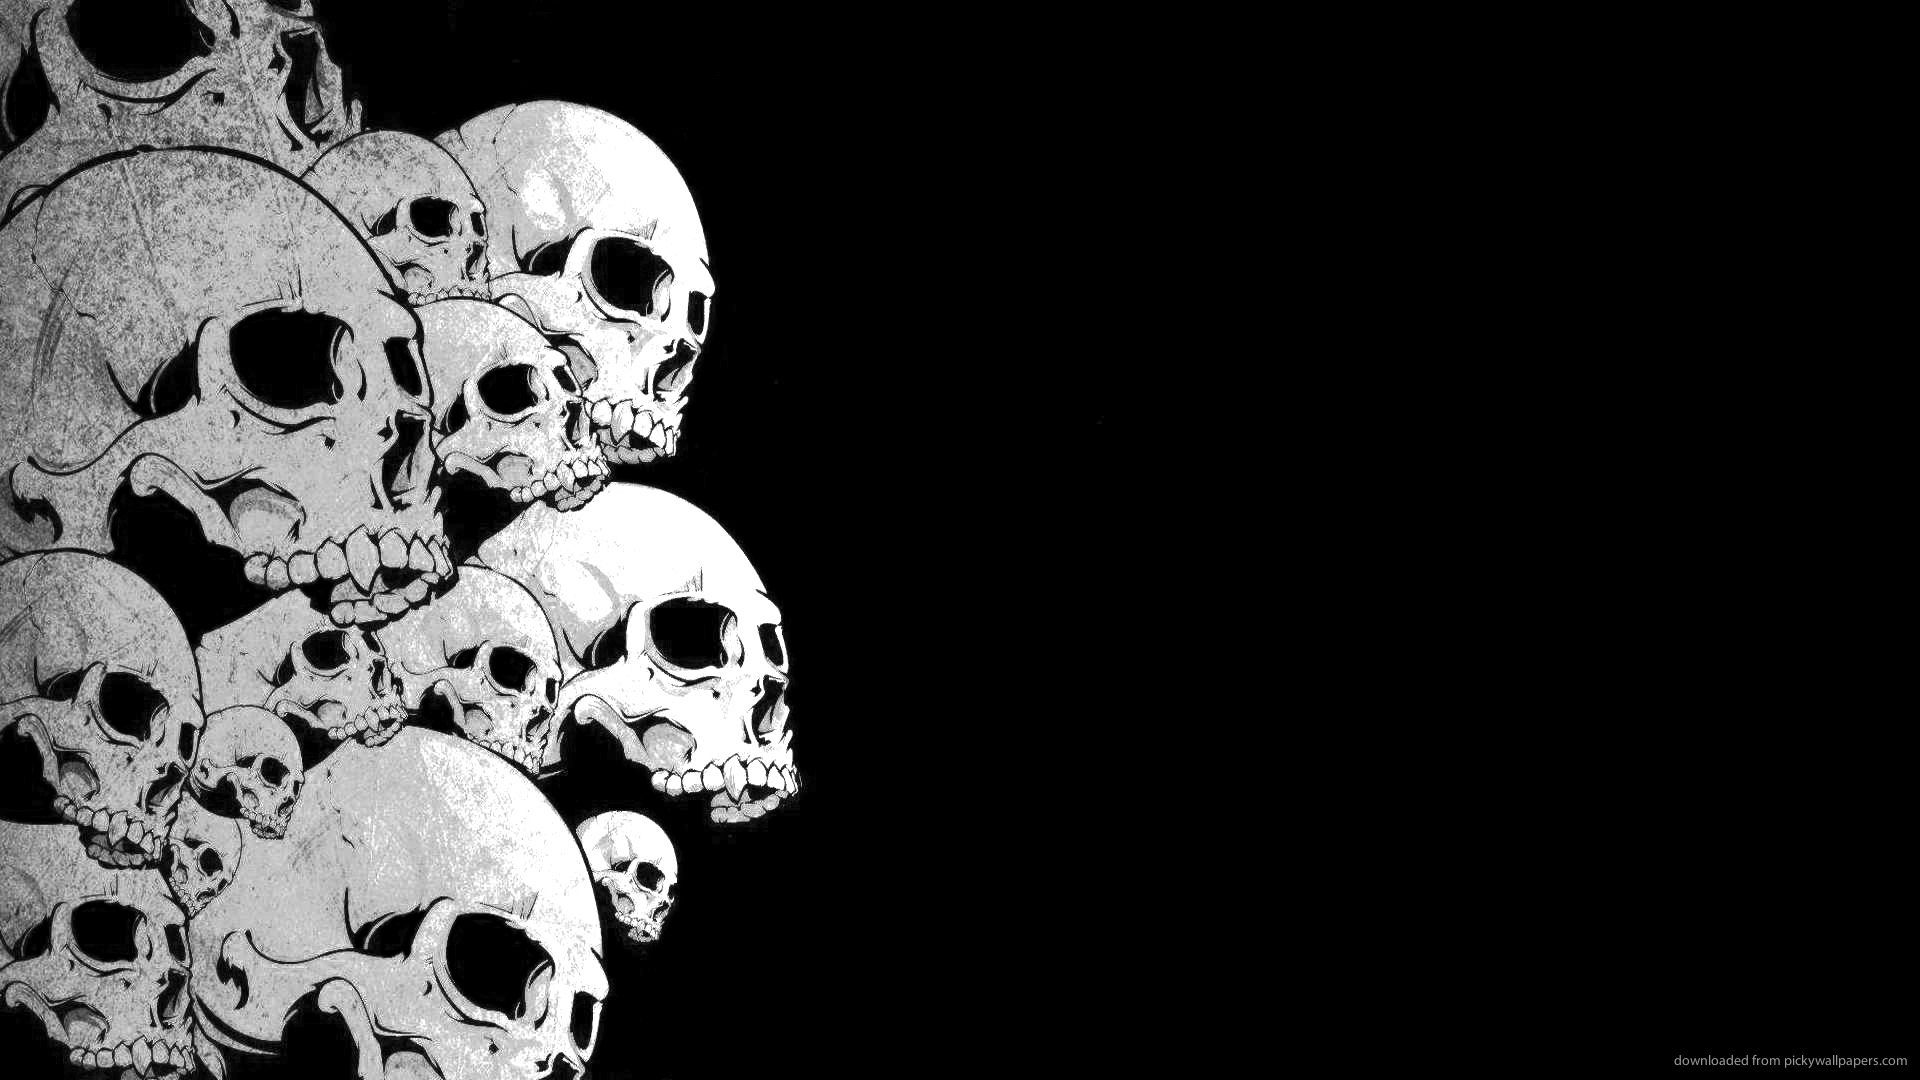 A Pile Of Skulls Wallpaper For iPhone 4